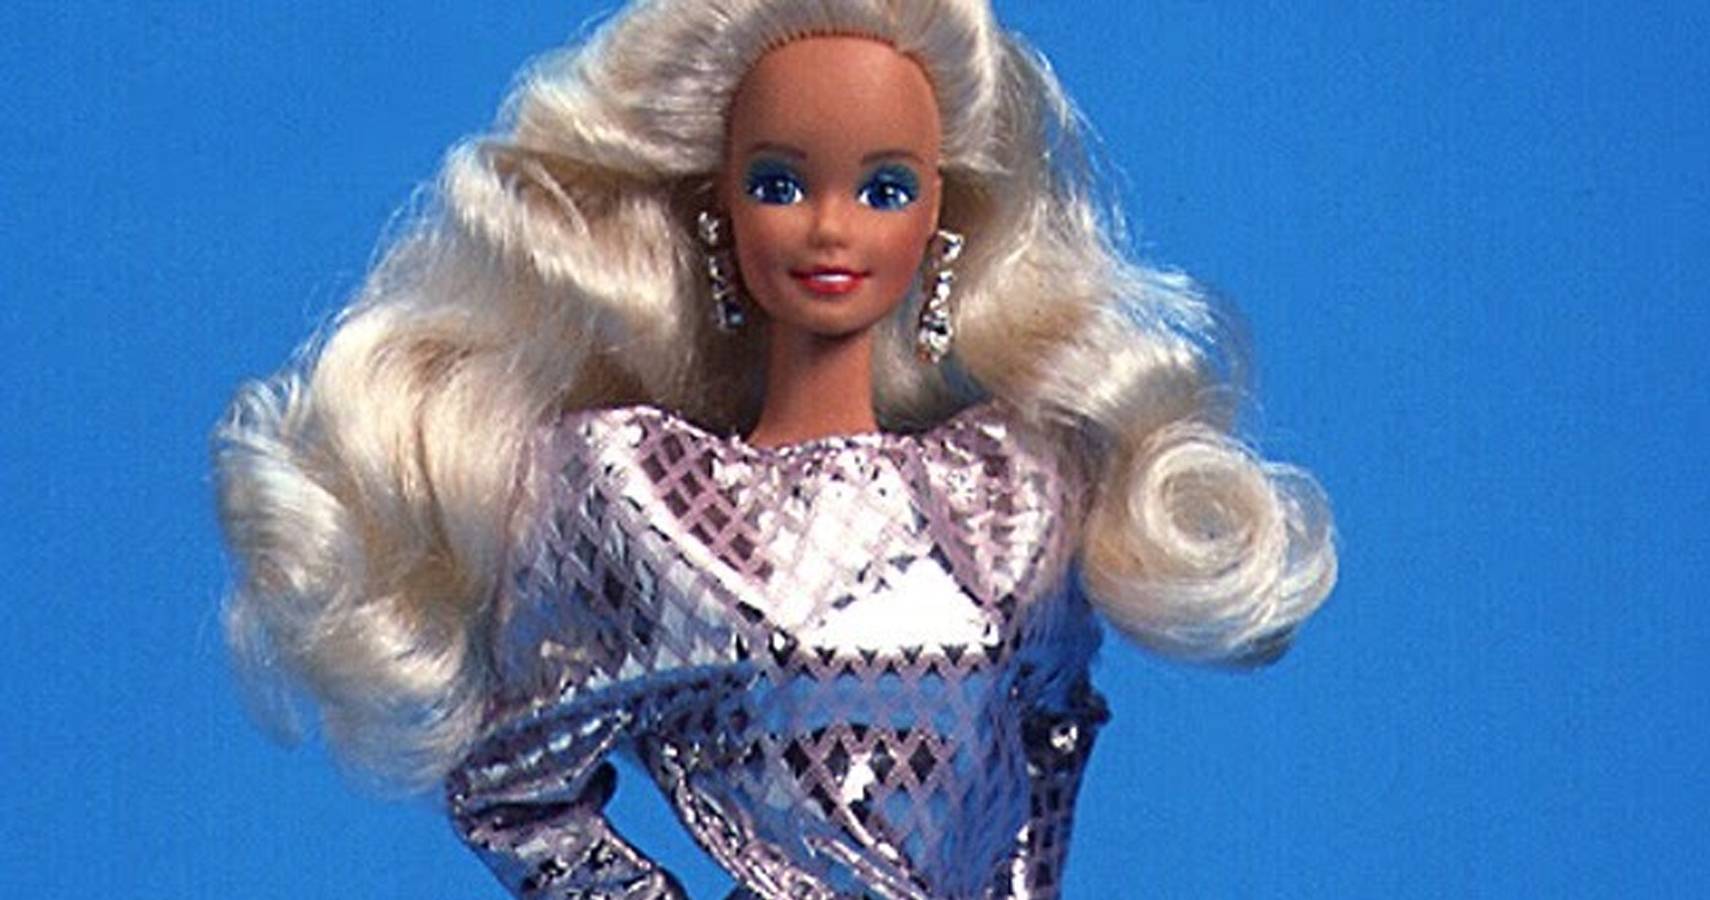 L.A at Last 2002 Barbie Doll for sale online